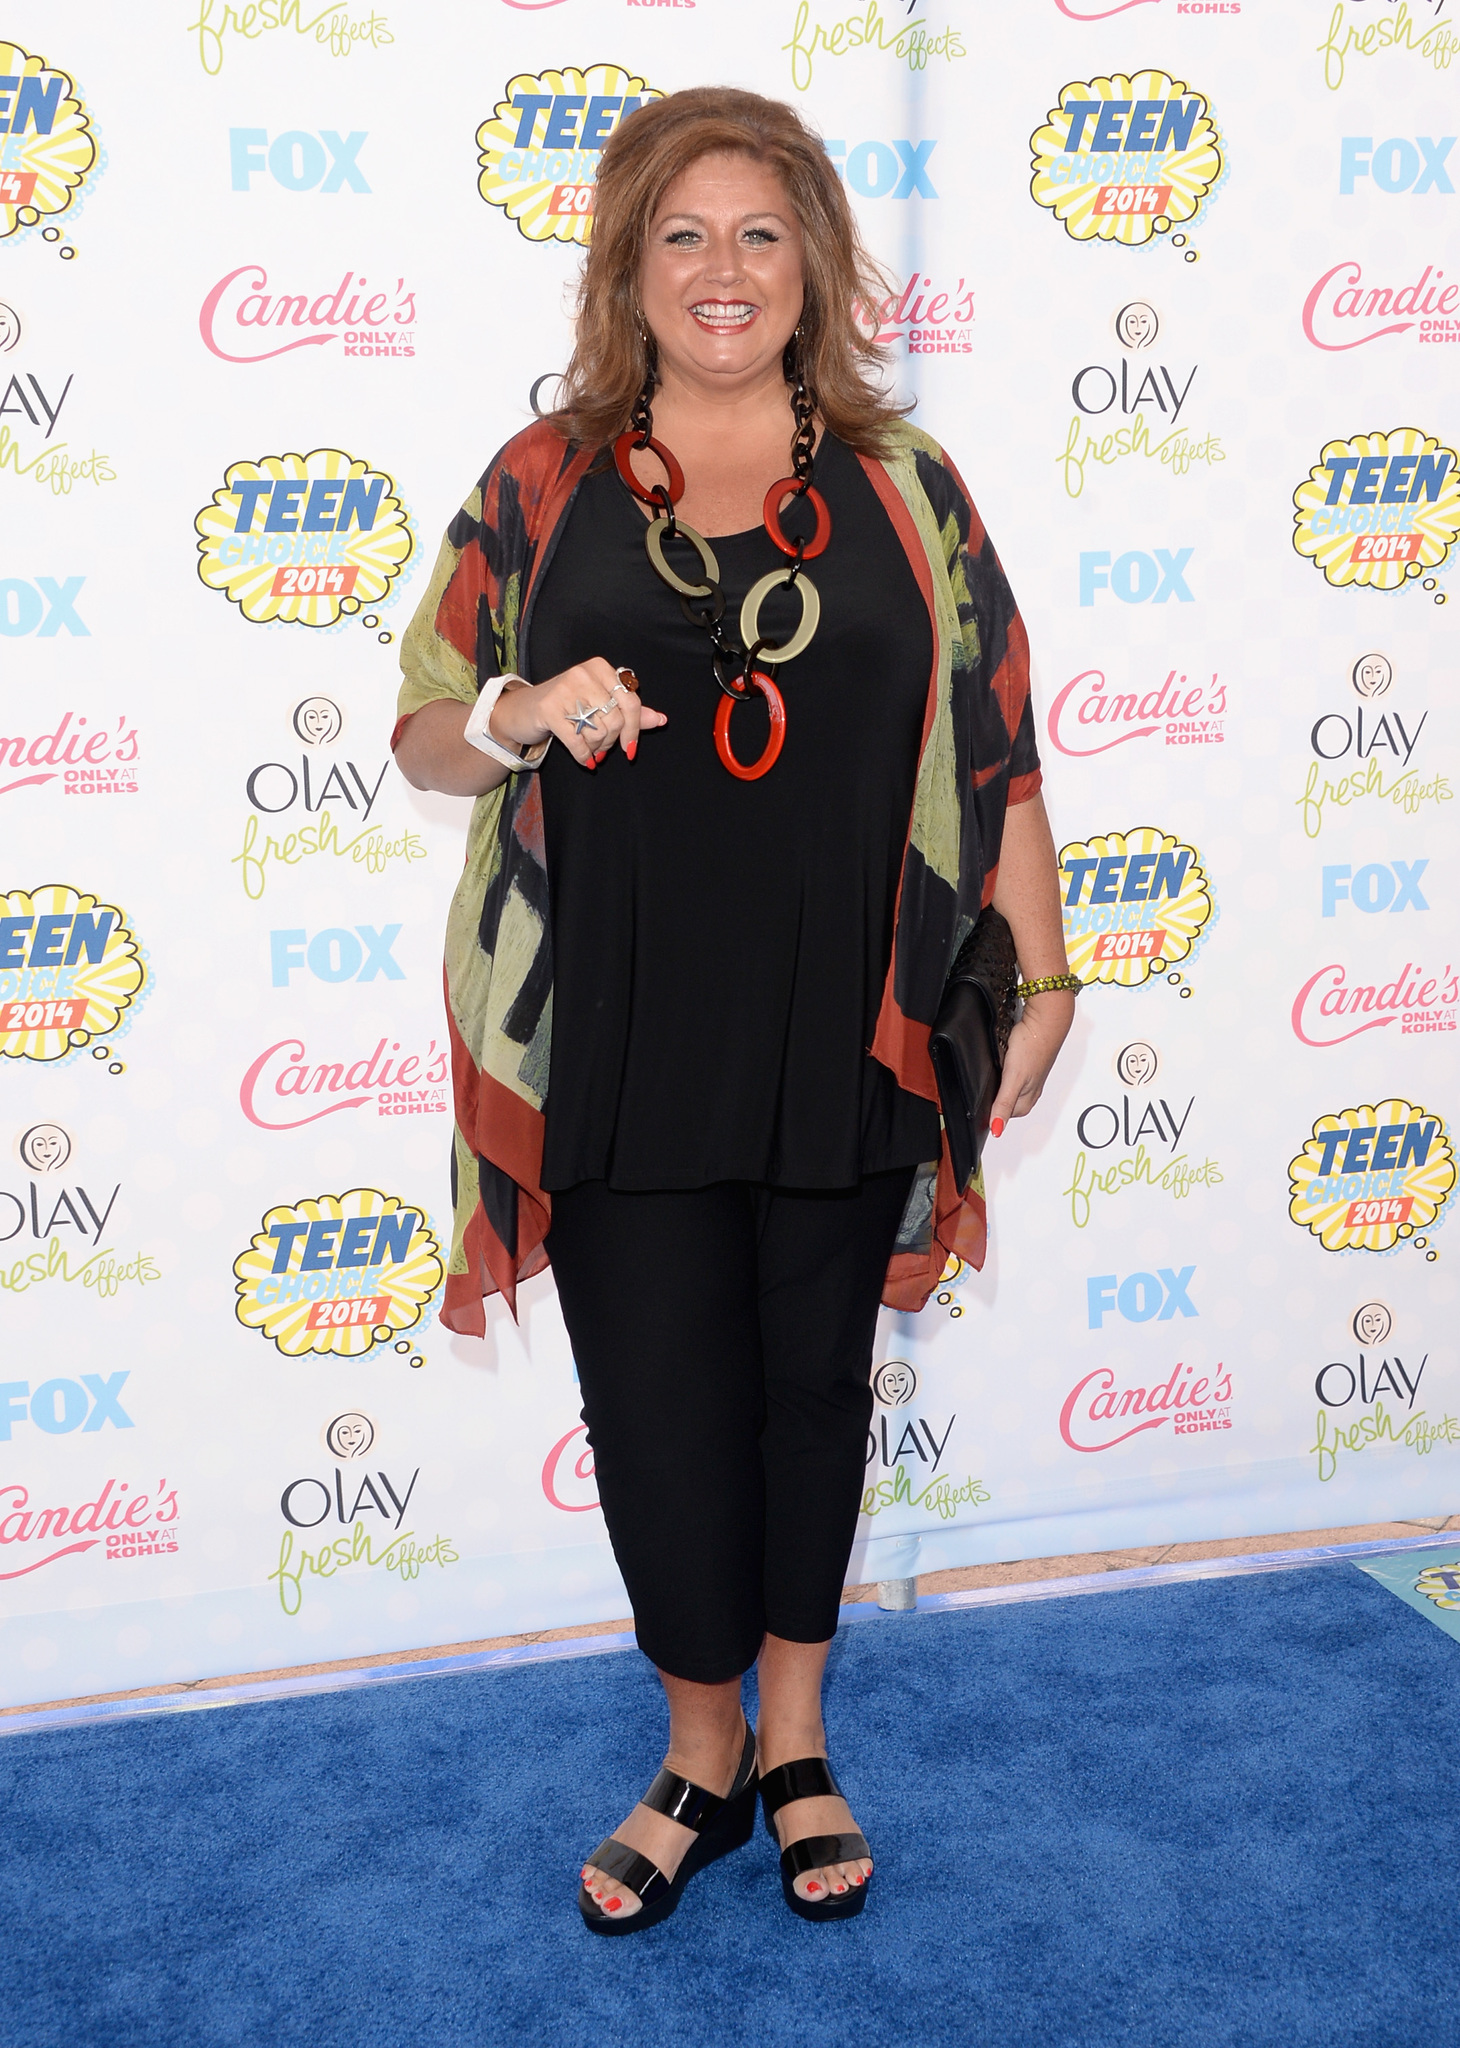 Abby Lee Miller at event of Teen Choice Awards 2014 (2014)